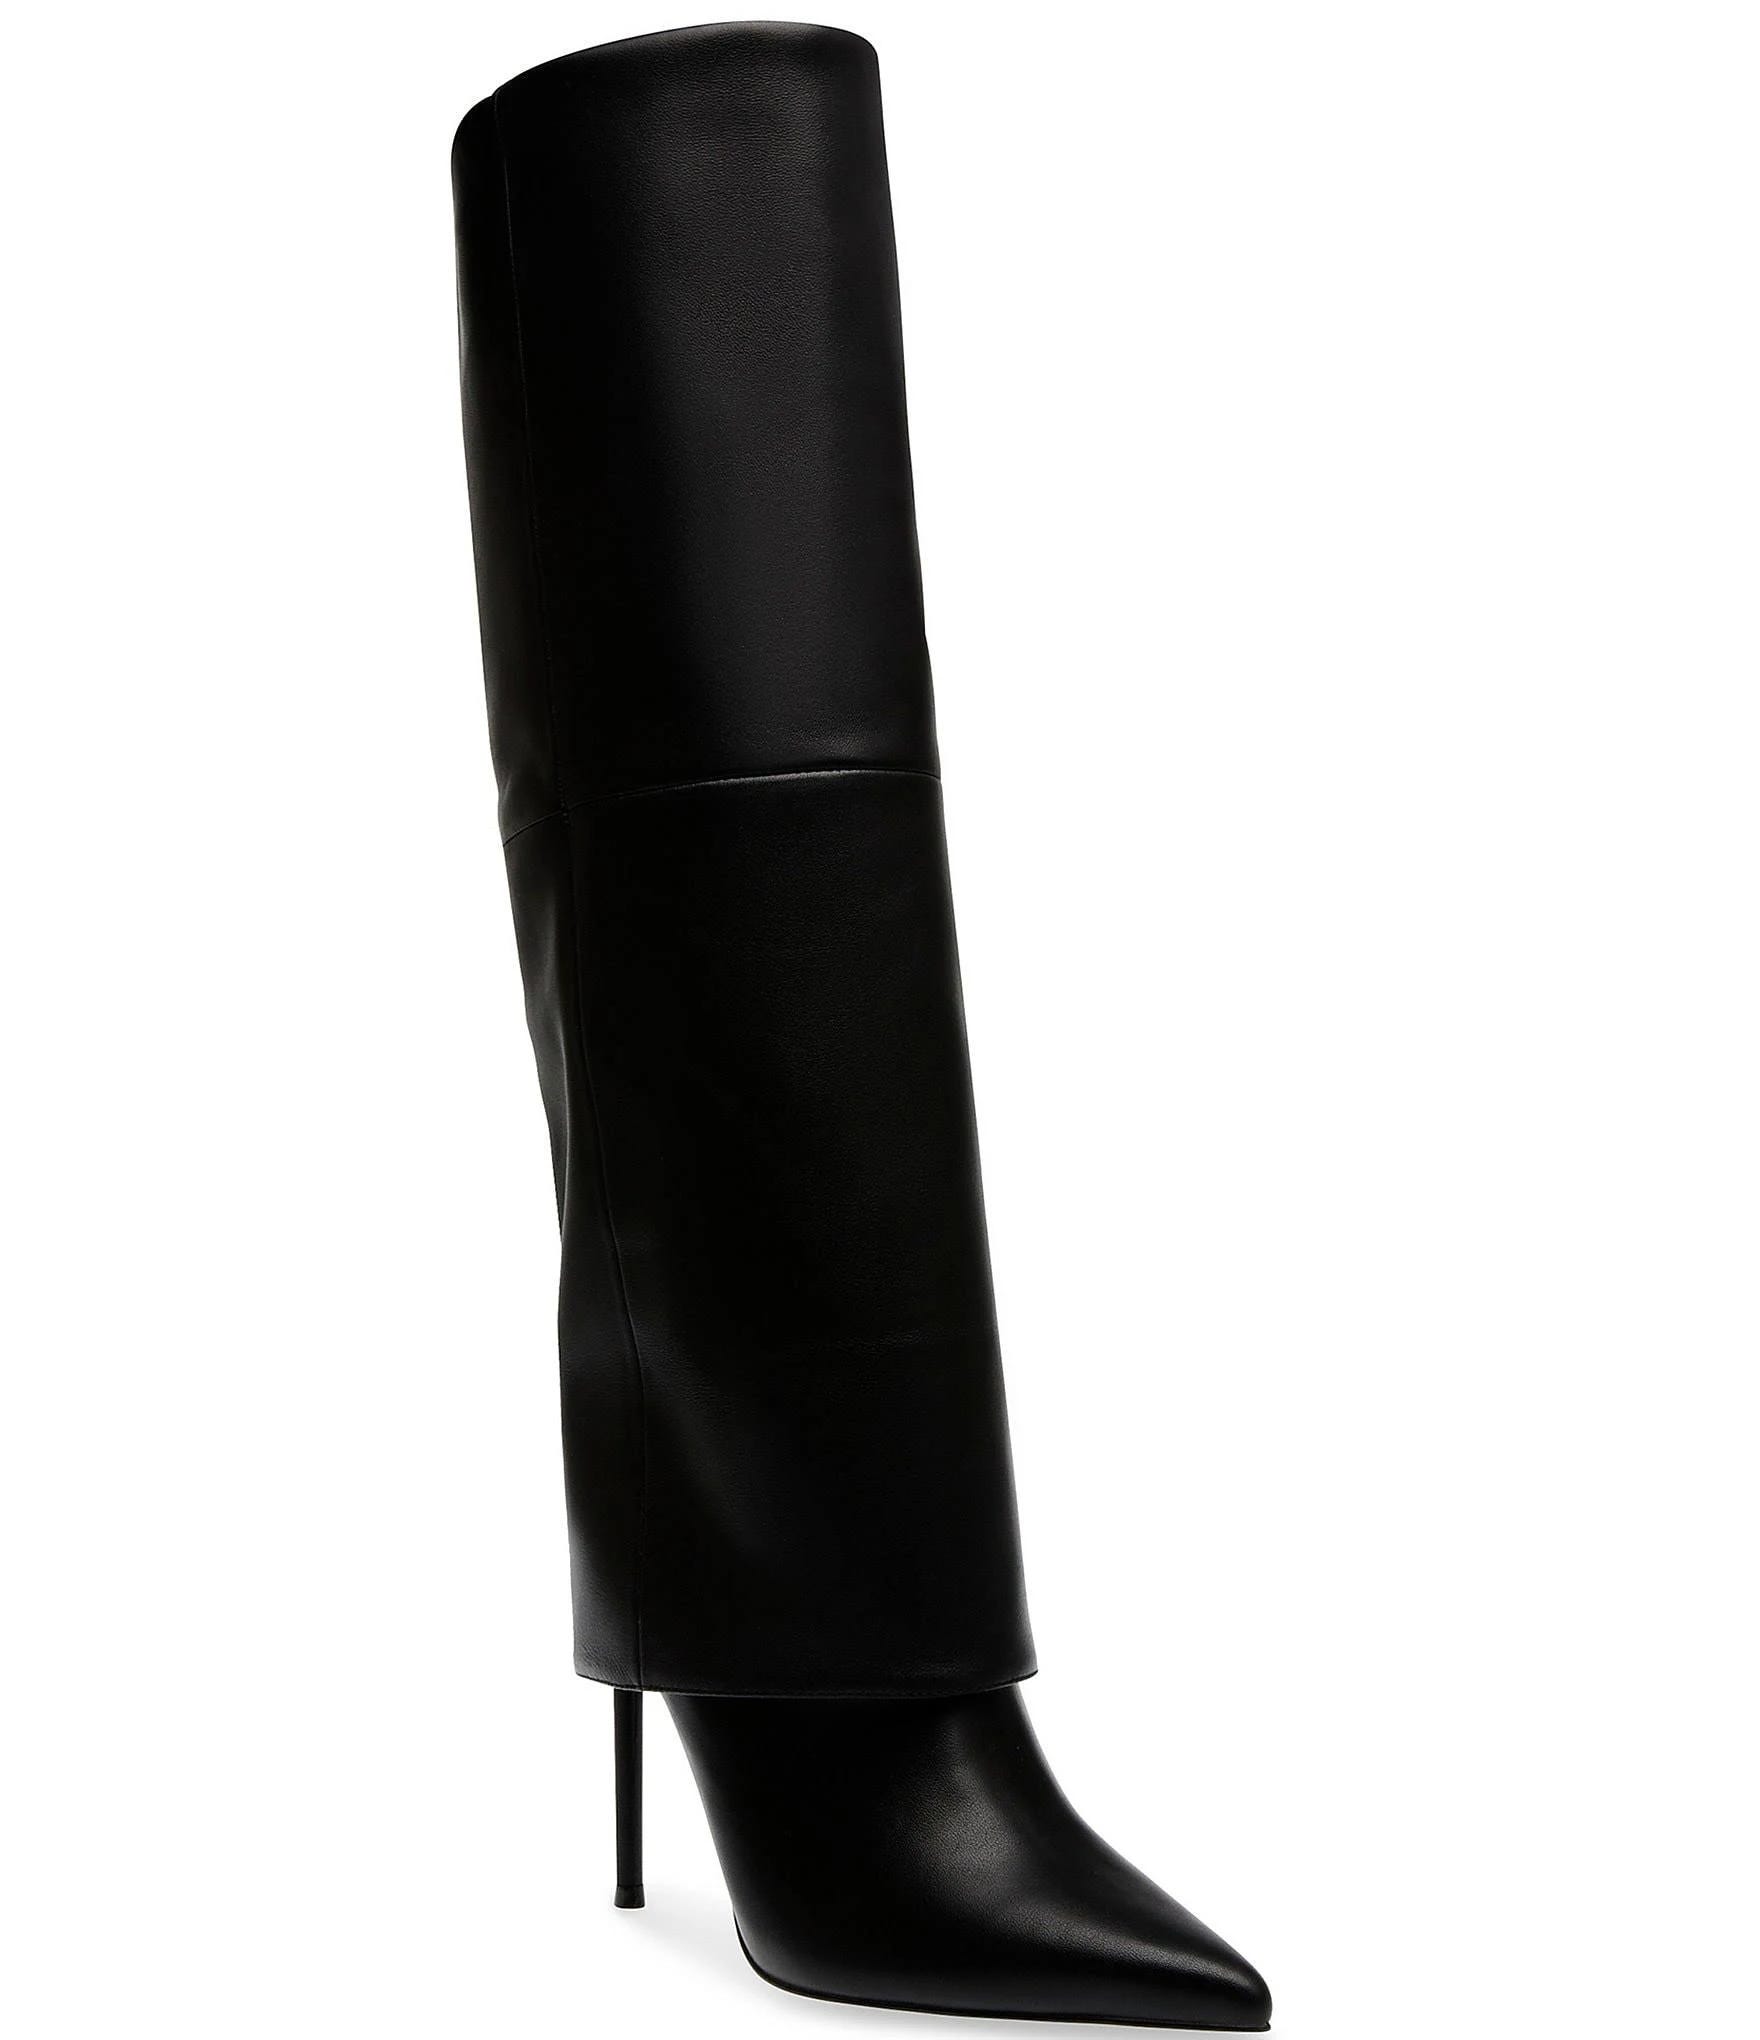 Pointy Leather Knee High Boot by Steve Madden | Image